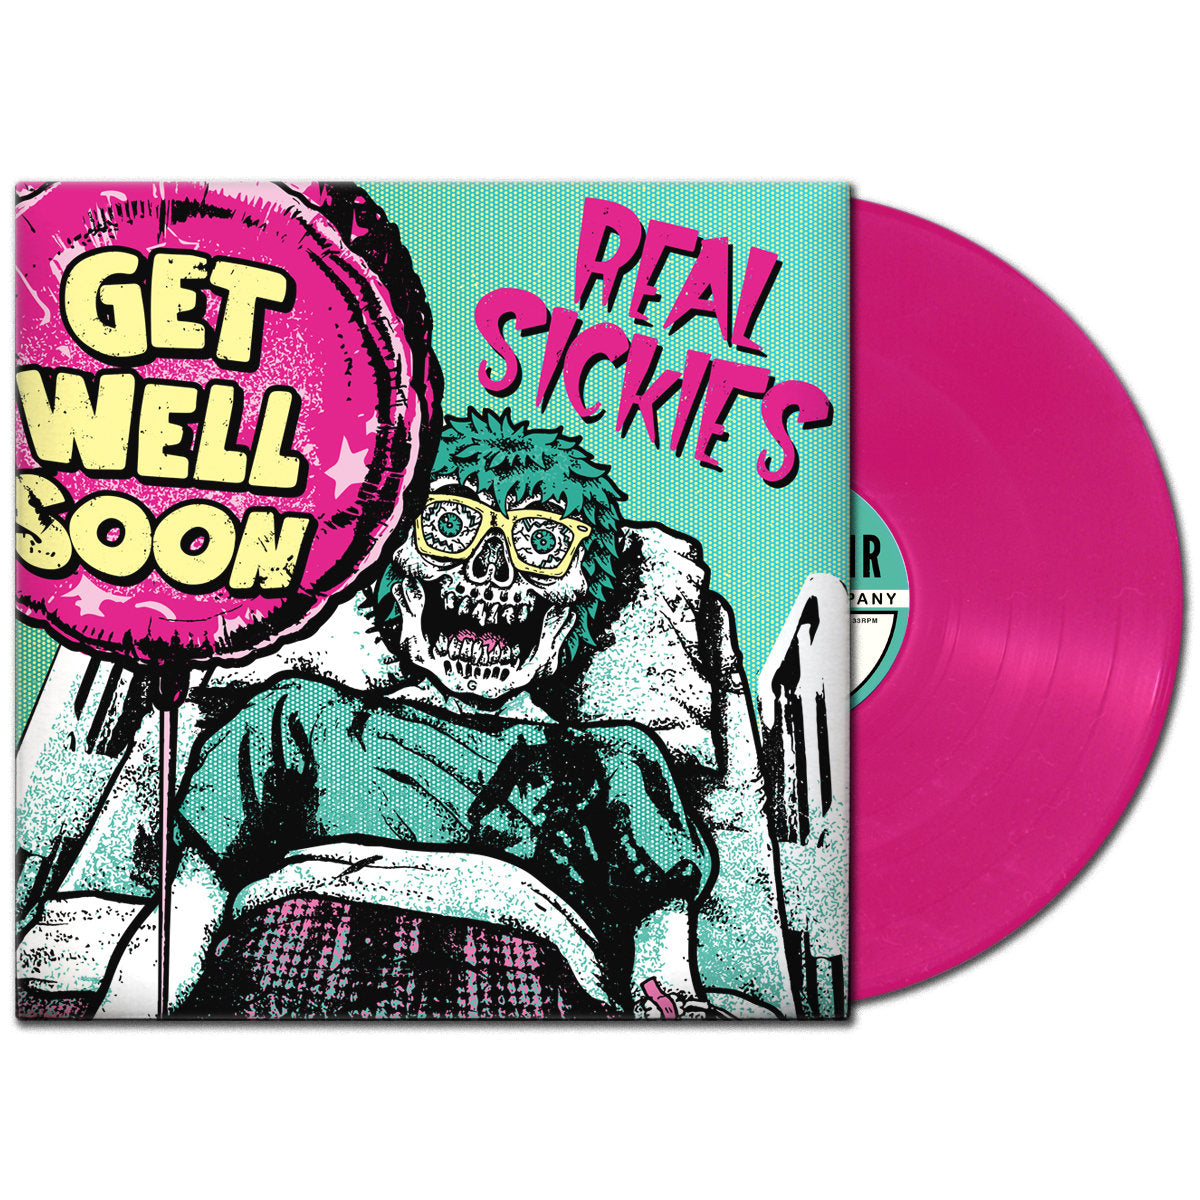 Real Sickies- Get Well Soon LP ~RARE GREEN COVER + PINK WAX LIMITED TO 100!